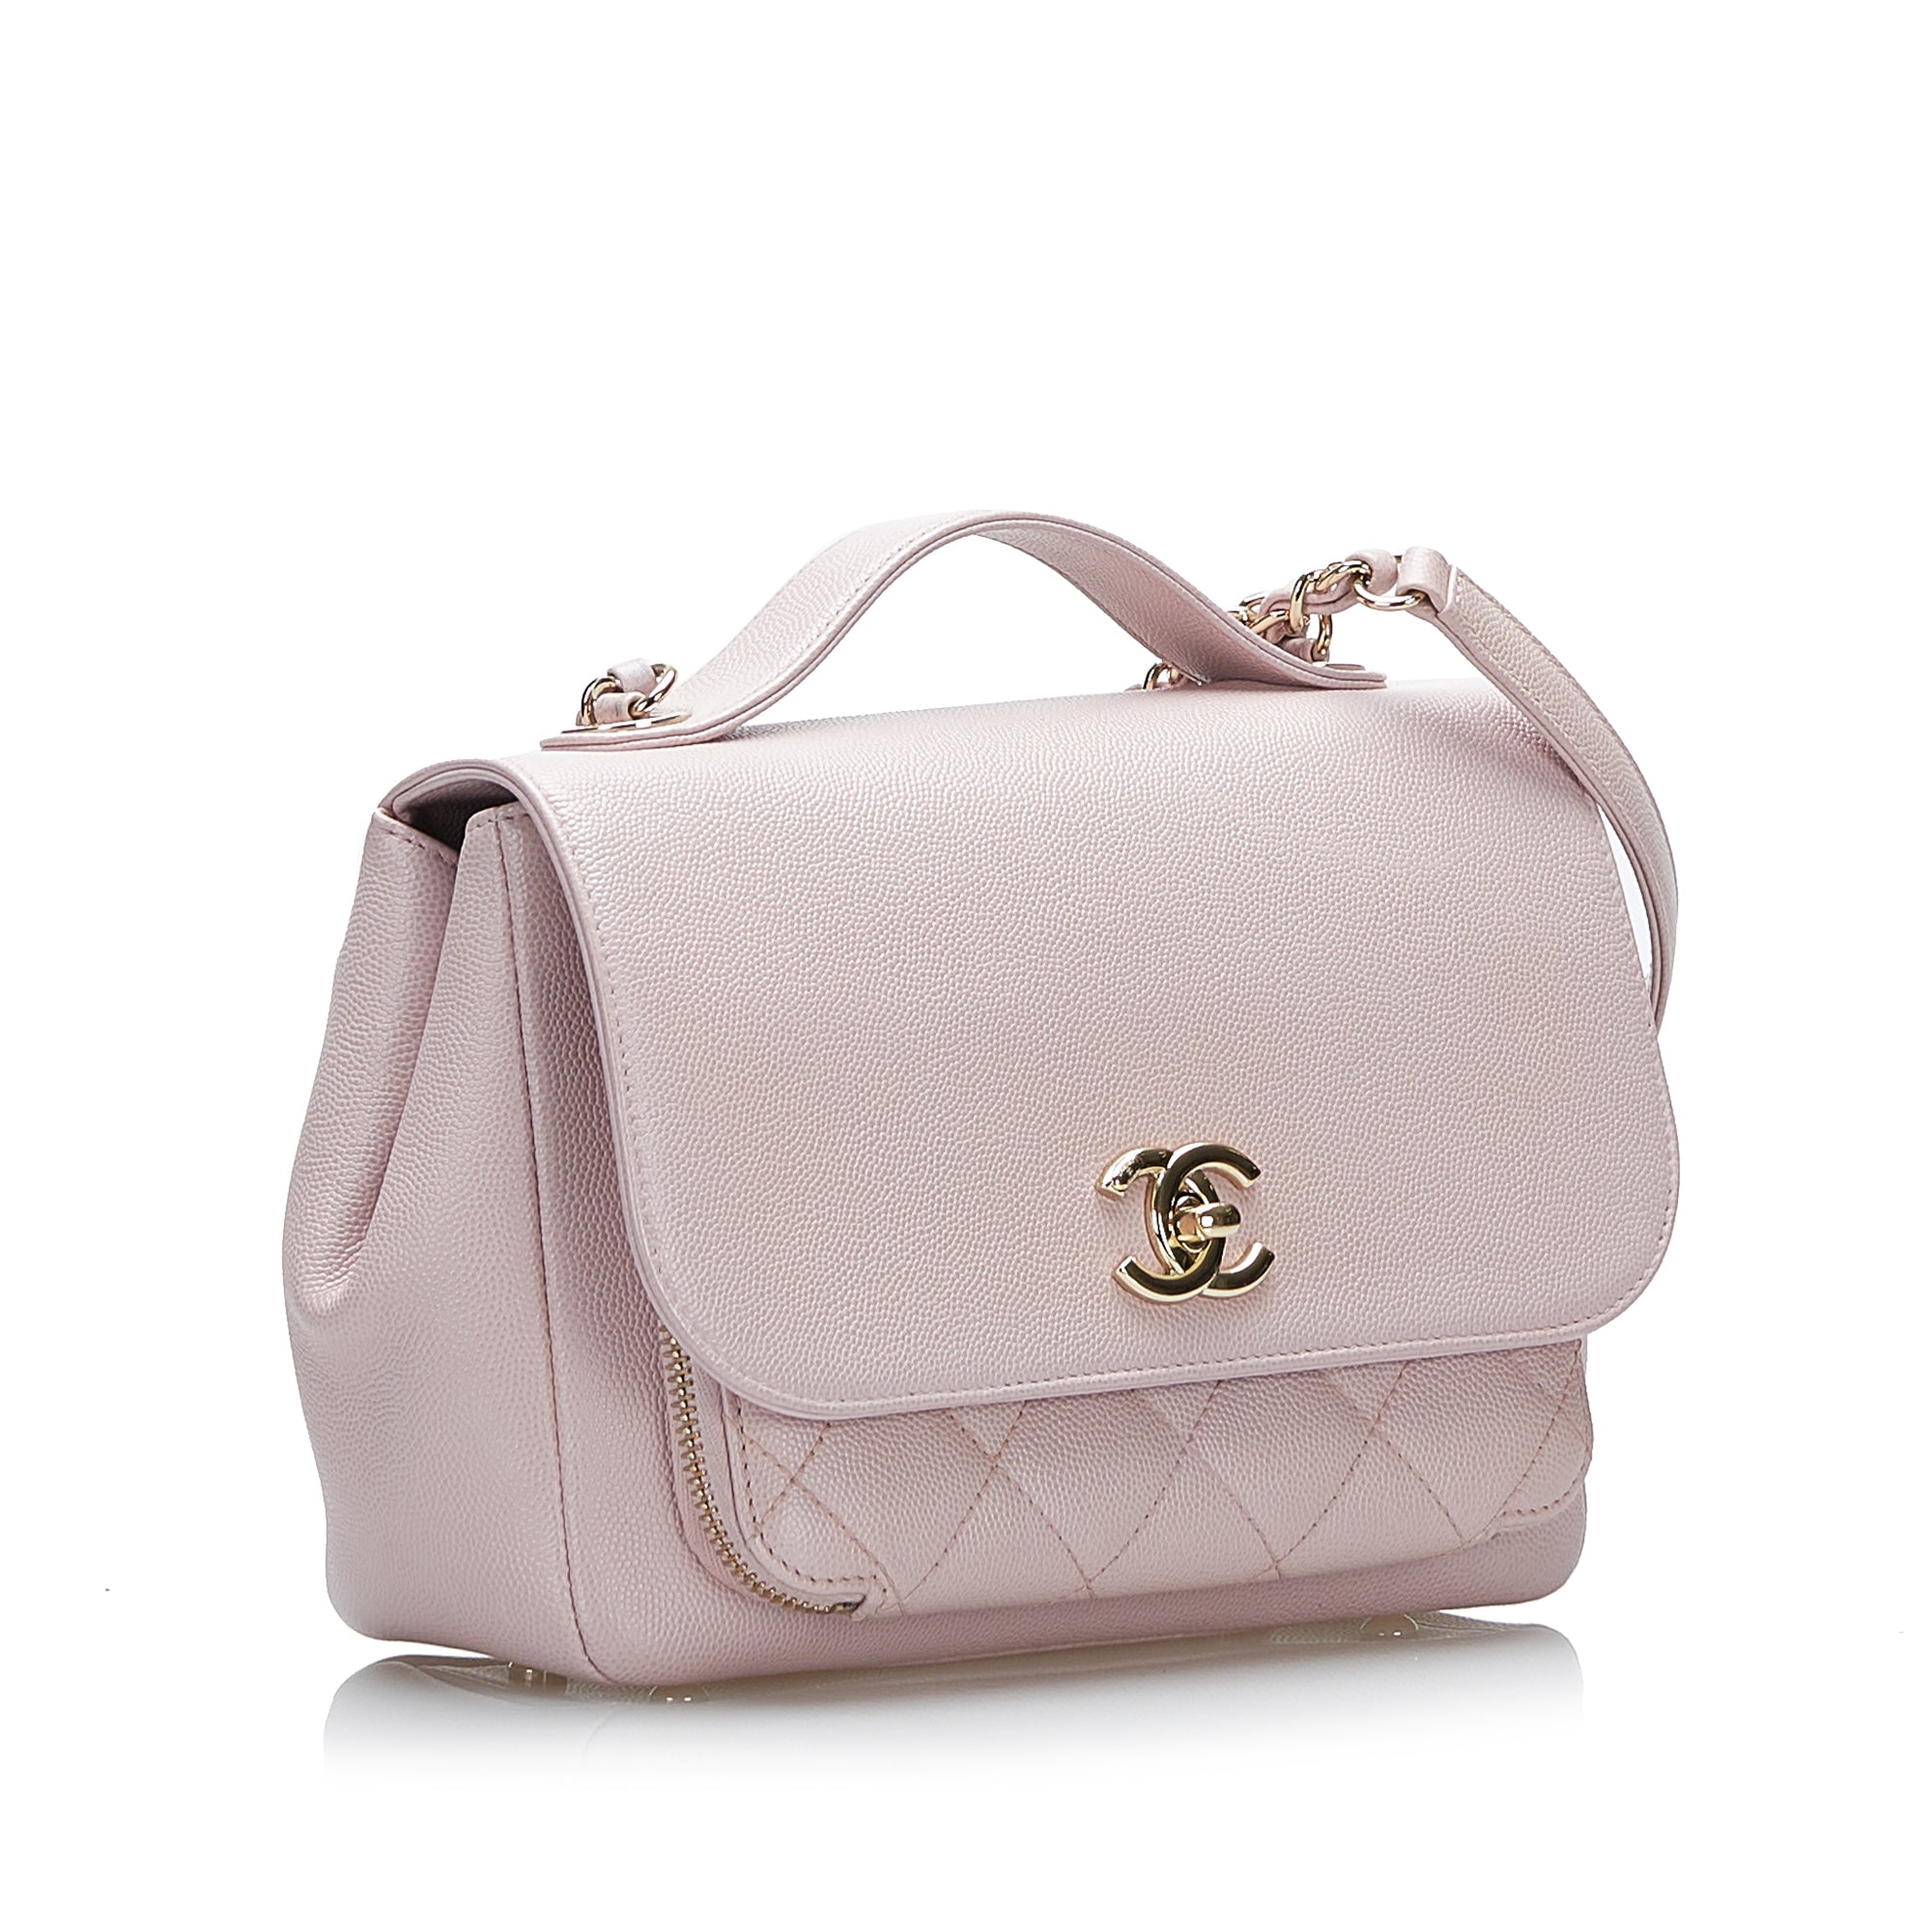 chanel business affinity pink